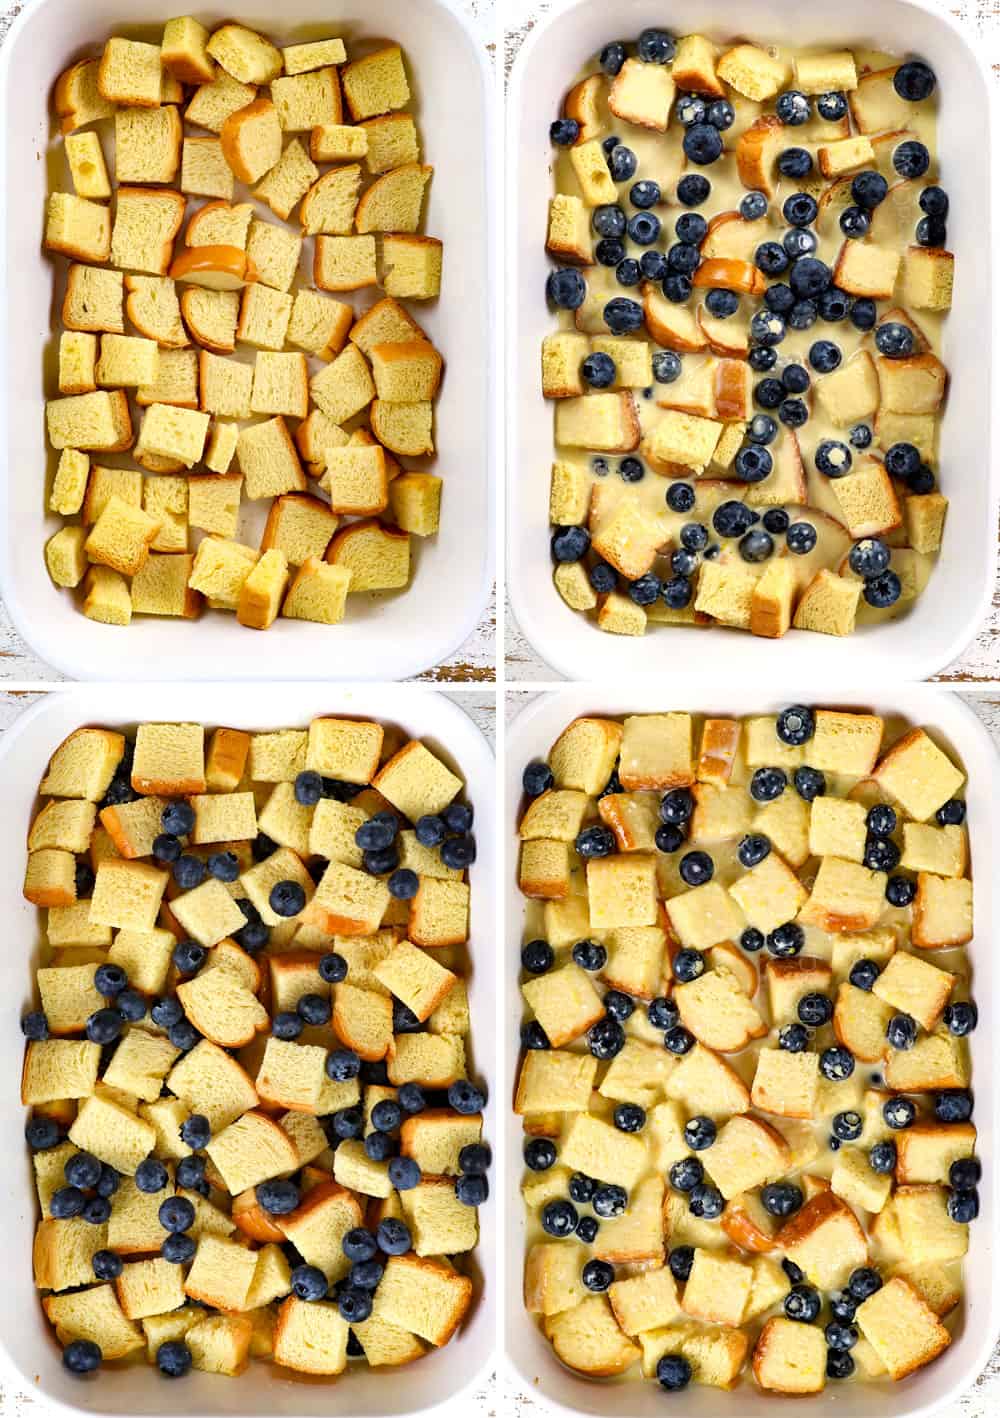 a collage showing how to make blueberry French toast casserole by adding bread cubes to 9x13 baking dish, adding blueberries, then adding custard then repeating the layers a second time